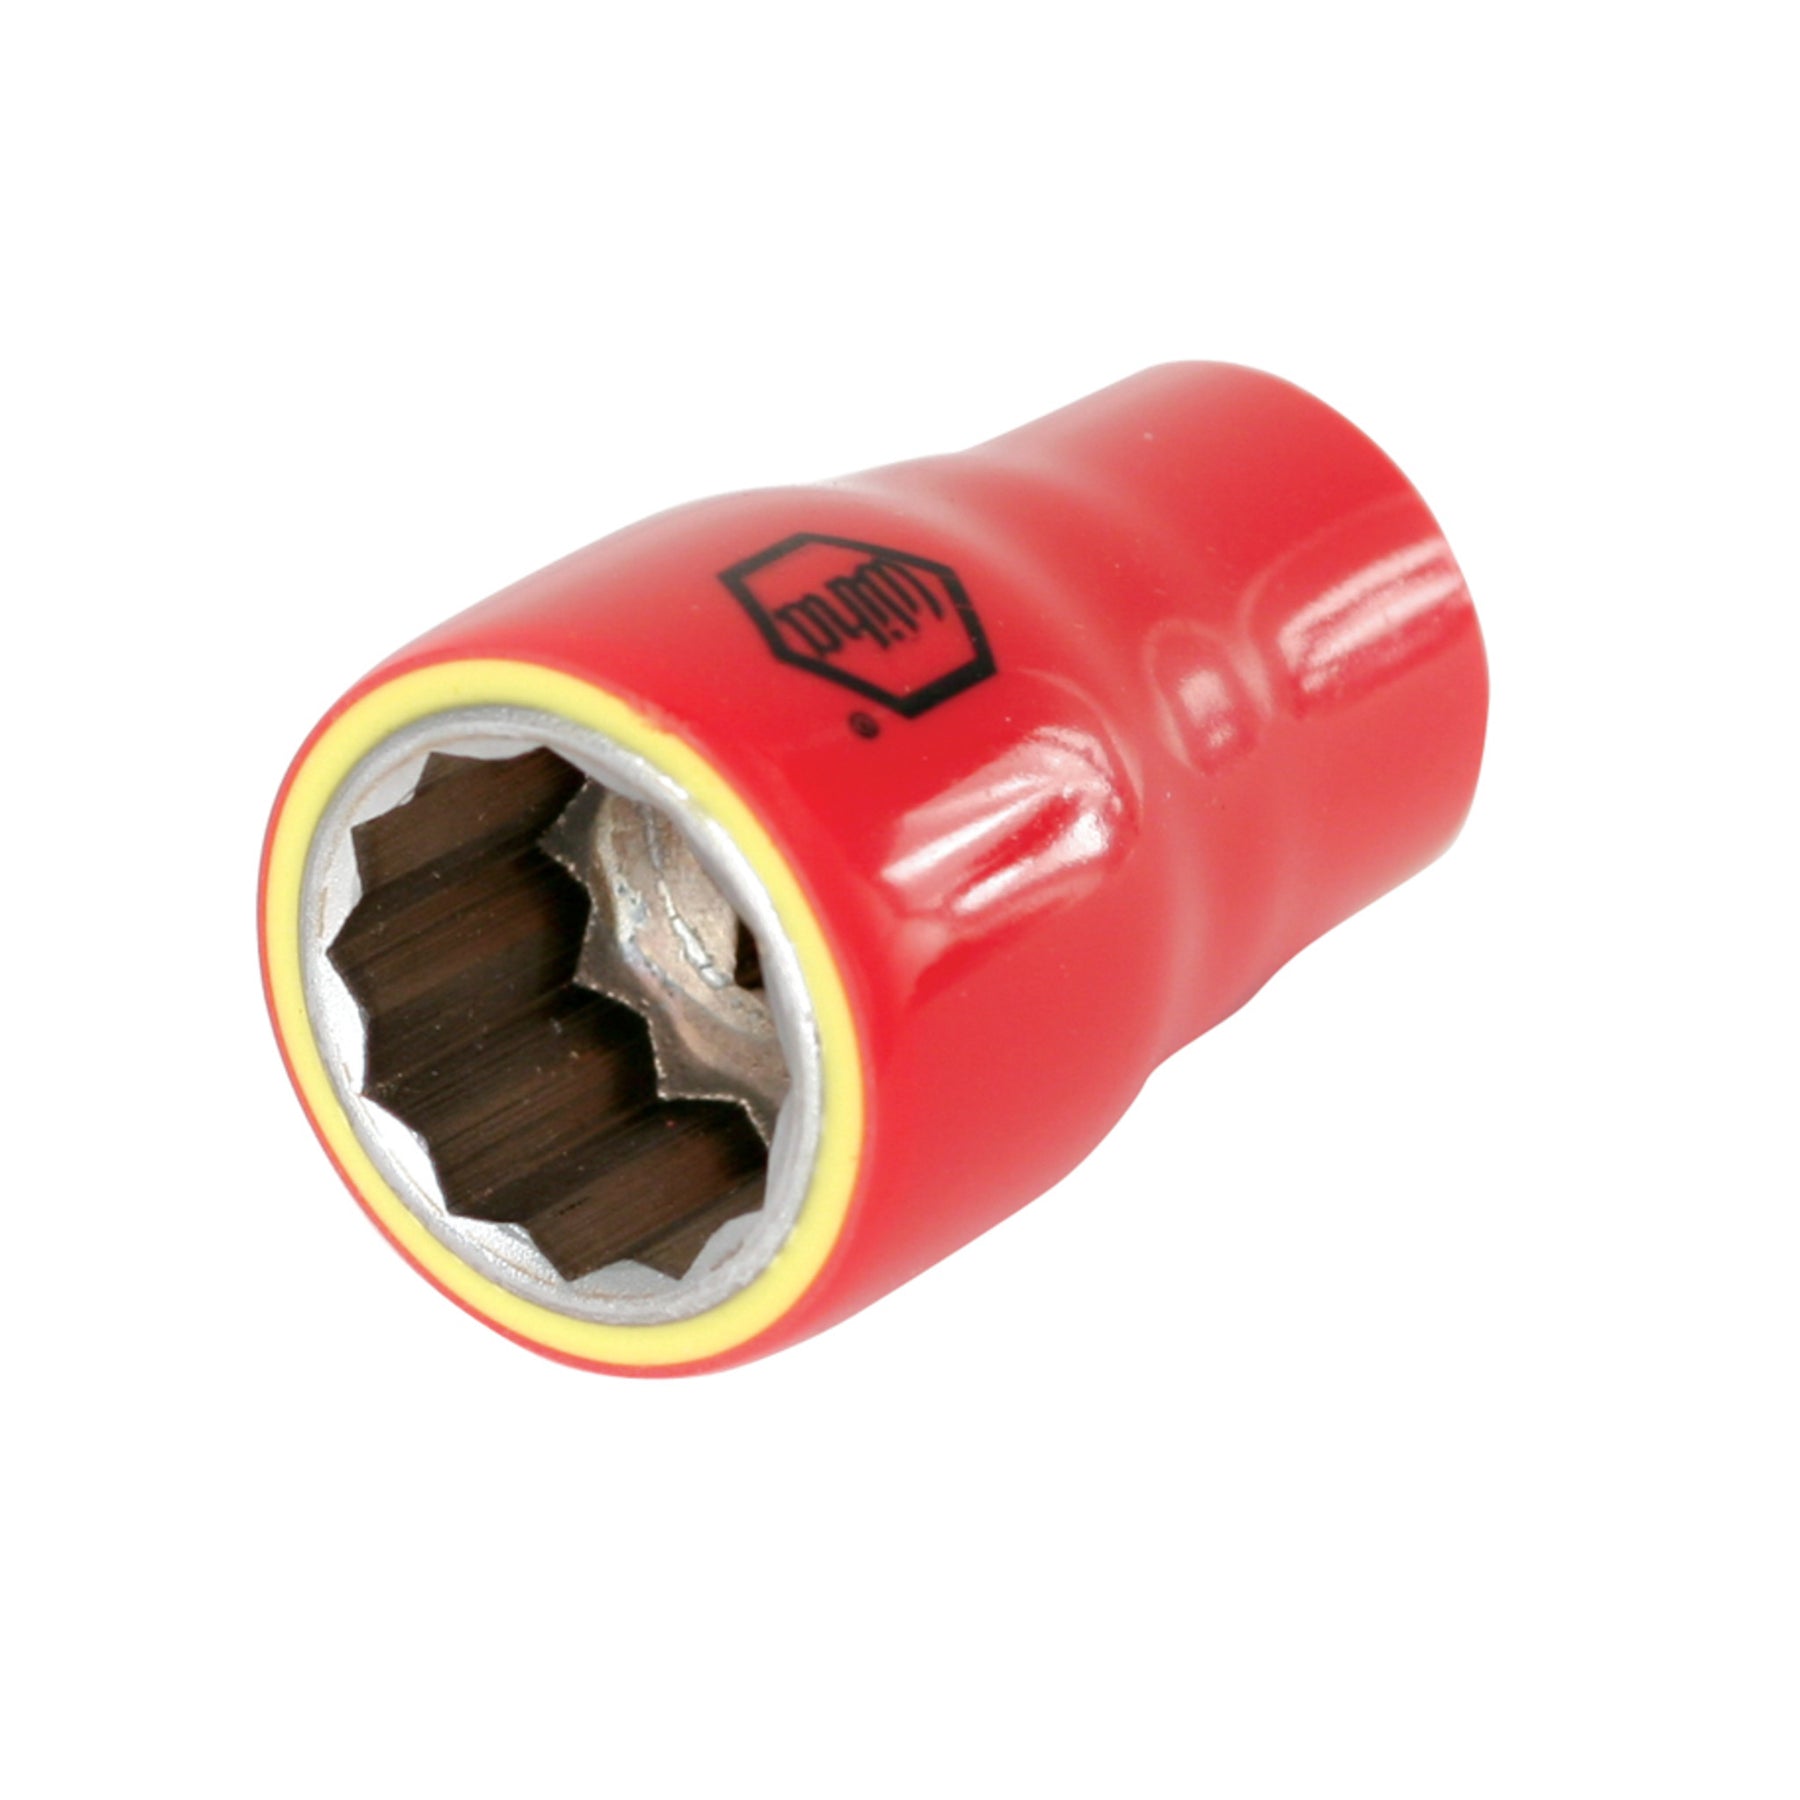 Insulated Socket 1/2" Drive 8mm